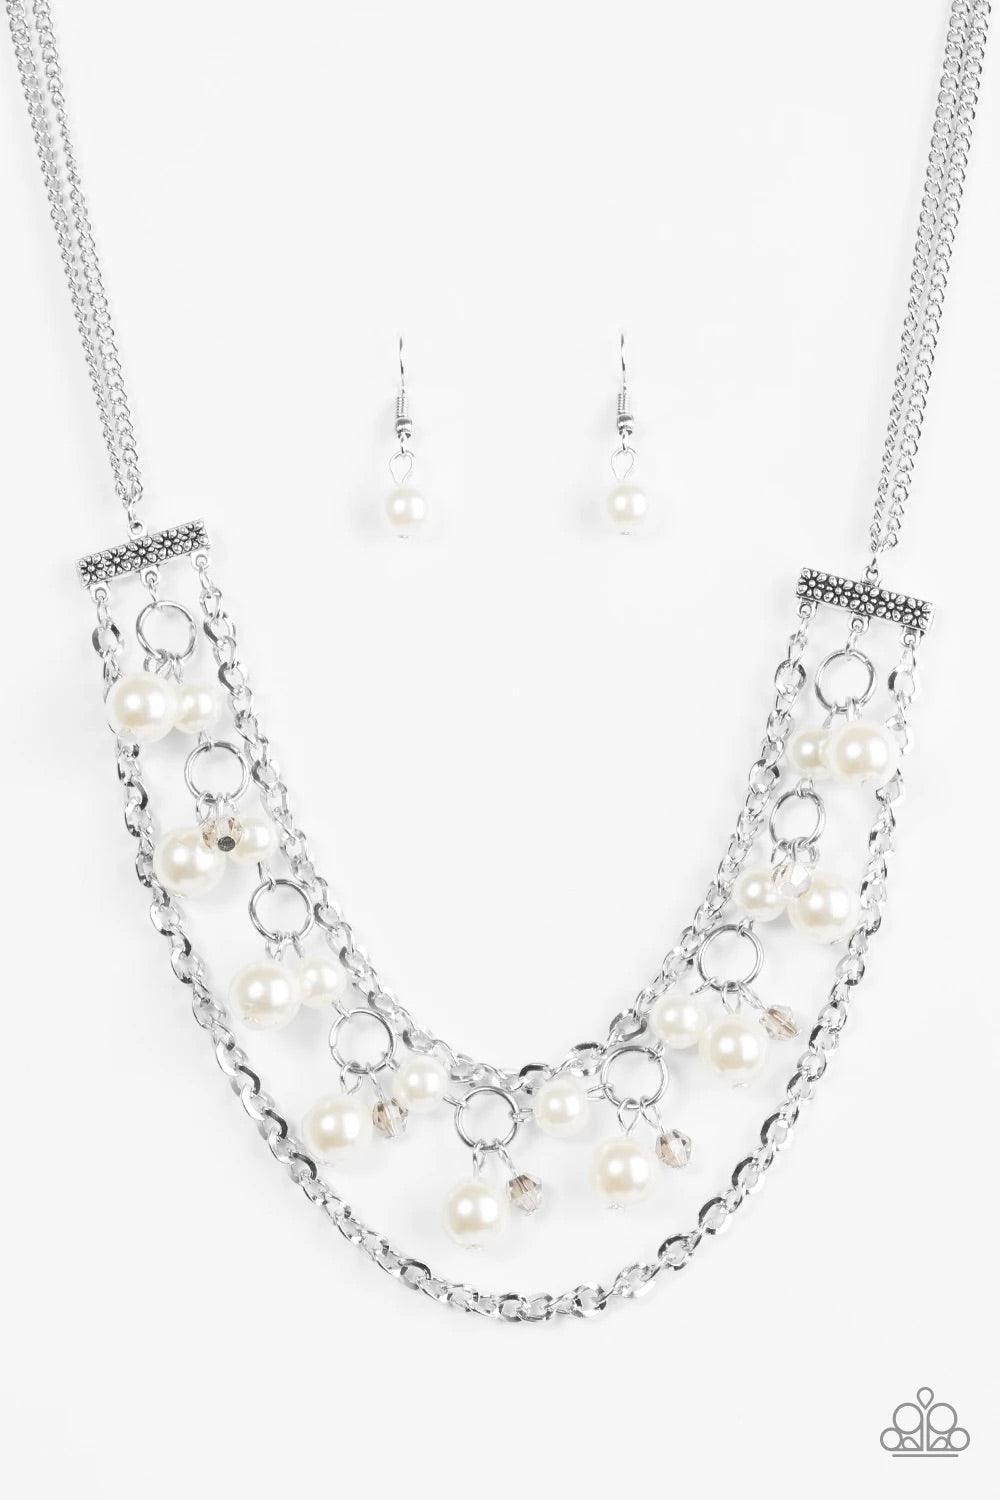 Paparazzi Accessories Rockefeller Romance ~White Attached to two floral fittings, rows of shimmery silver chains flank a pearly beaded strand below the collar. Dramatic white pearls and faceted crystal-like beads swing from the centermost strand for a ref